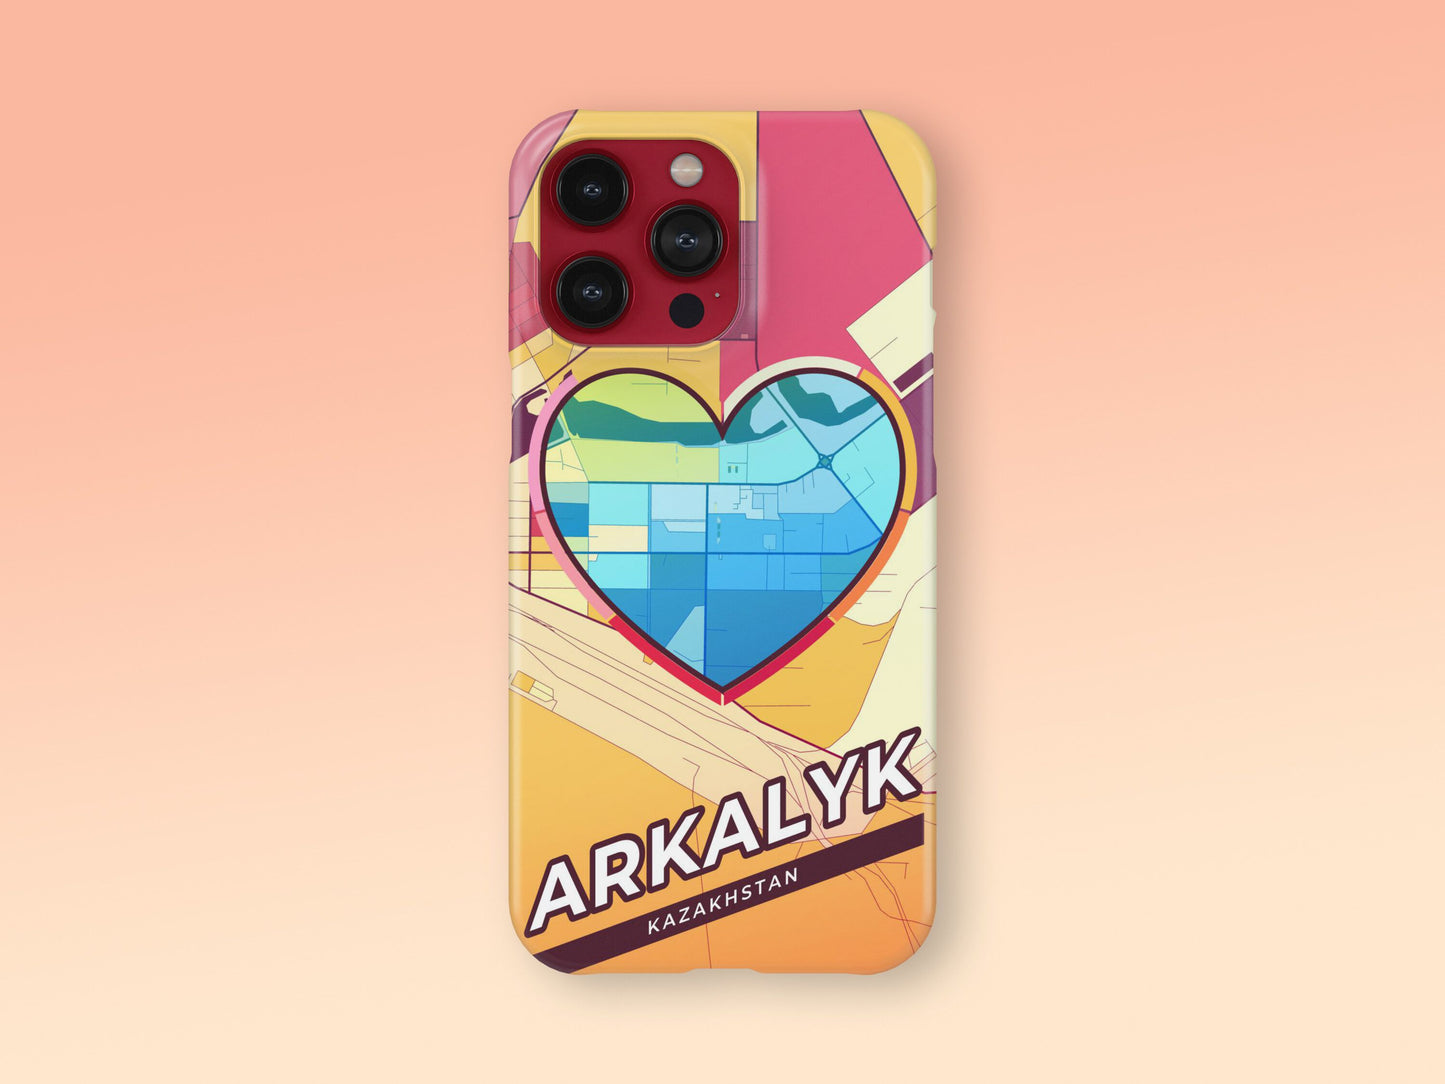 Arkalyk Kazakhstan slim phone case with colorful icon. Birthday, wedding or housewarming gift. Couple match cases. 2